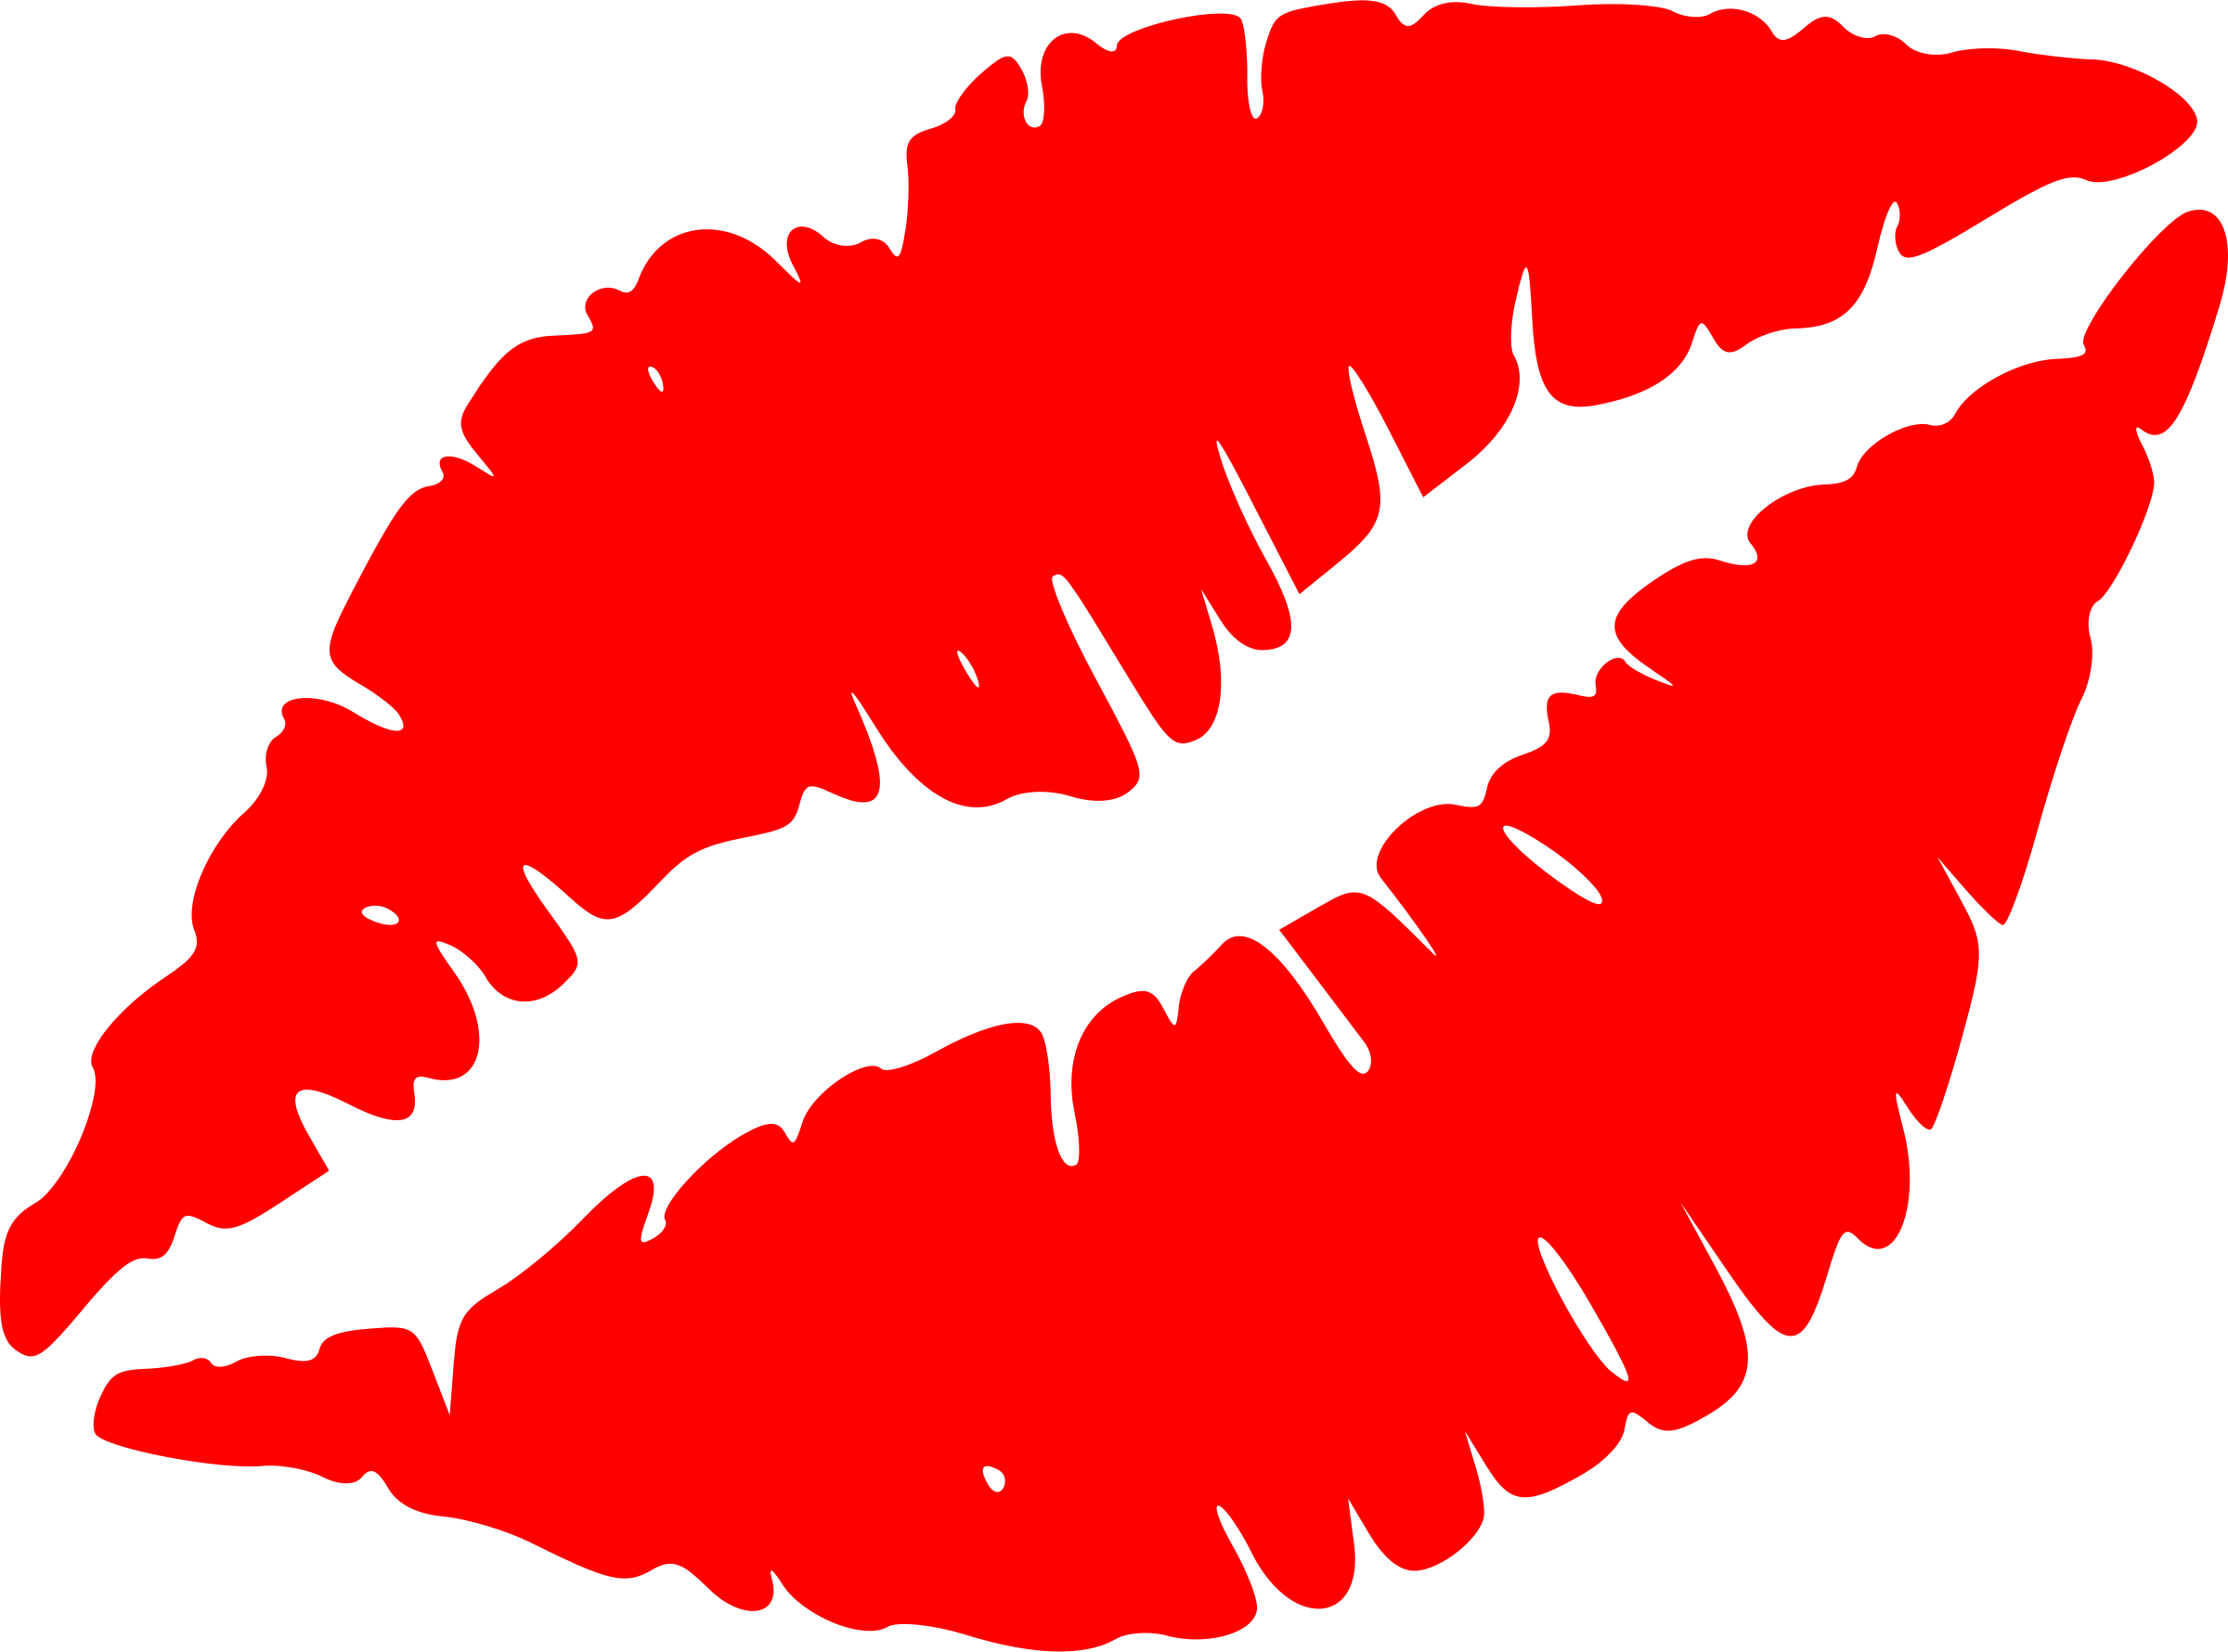 kiss clipart black and white - Google Search